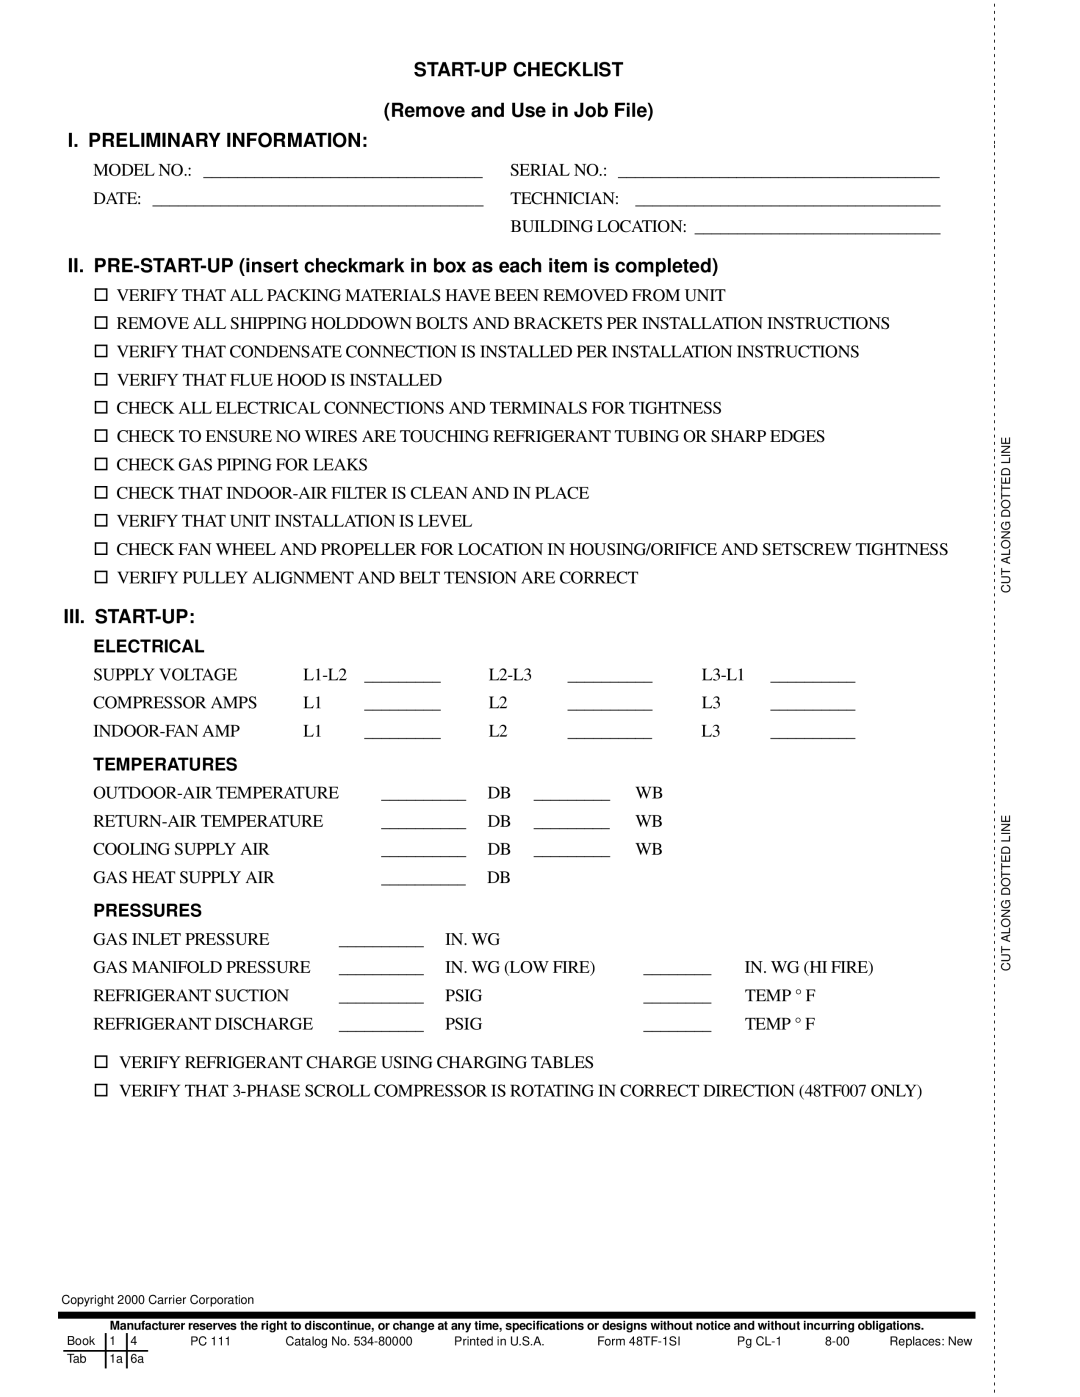 Carrier 48TF004-007 START-UPCHECKLIST Remove and Use in Job File, I. Preliminary Information, Iii. Start-Up, Electrical 